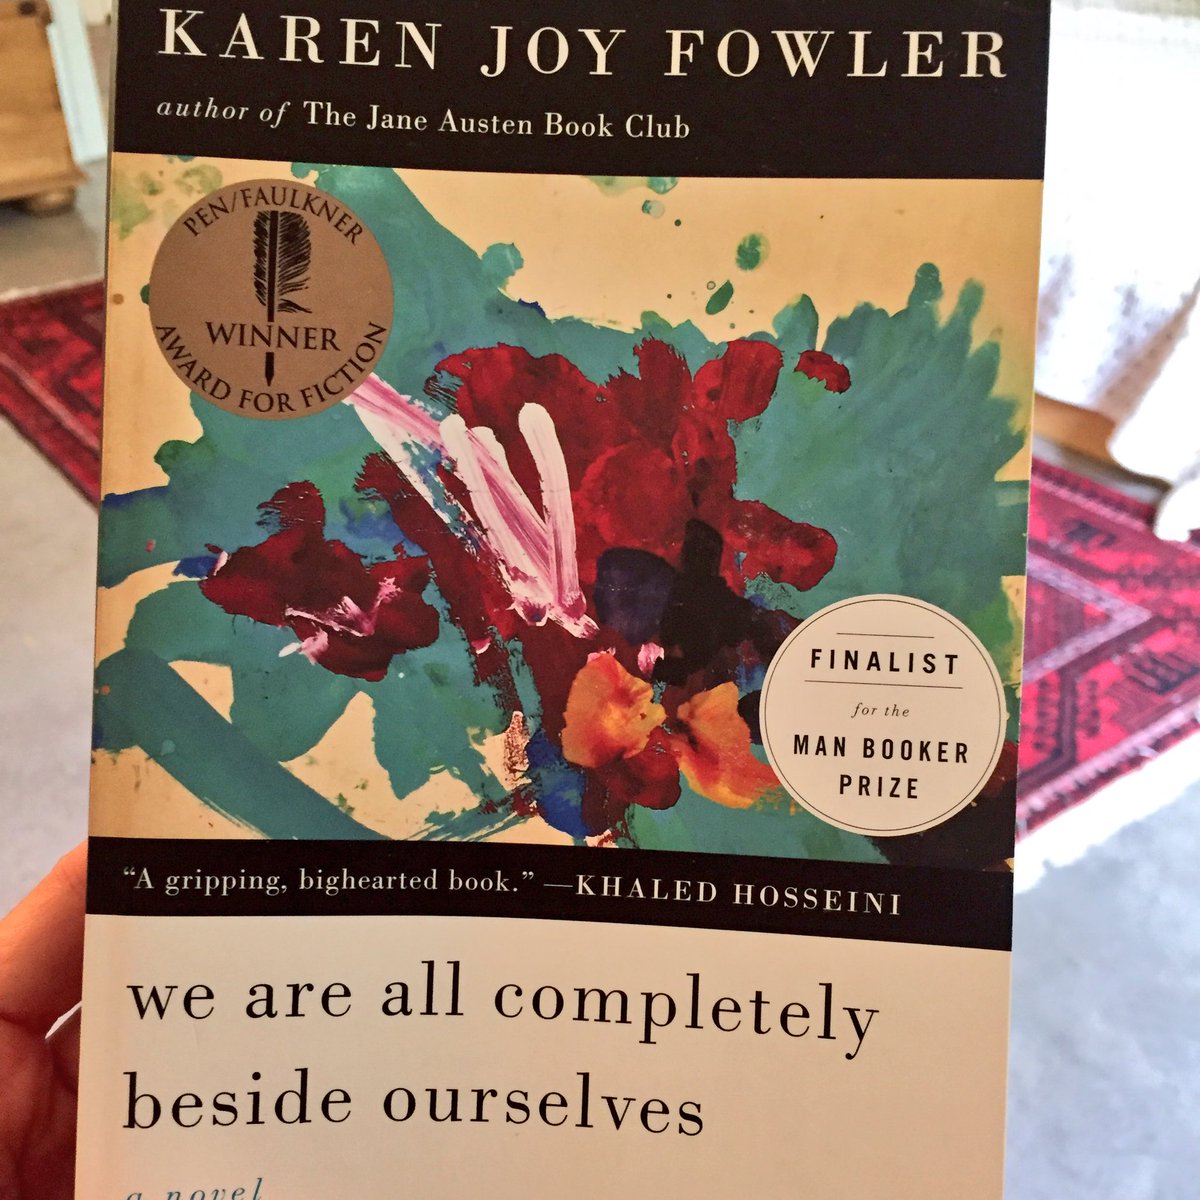 This amazing book is now soggy with tears. Wow. Just. Wow. #KarenJoyFowler